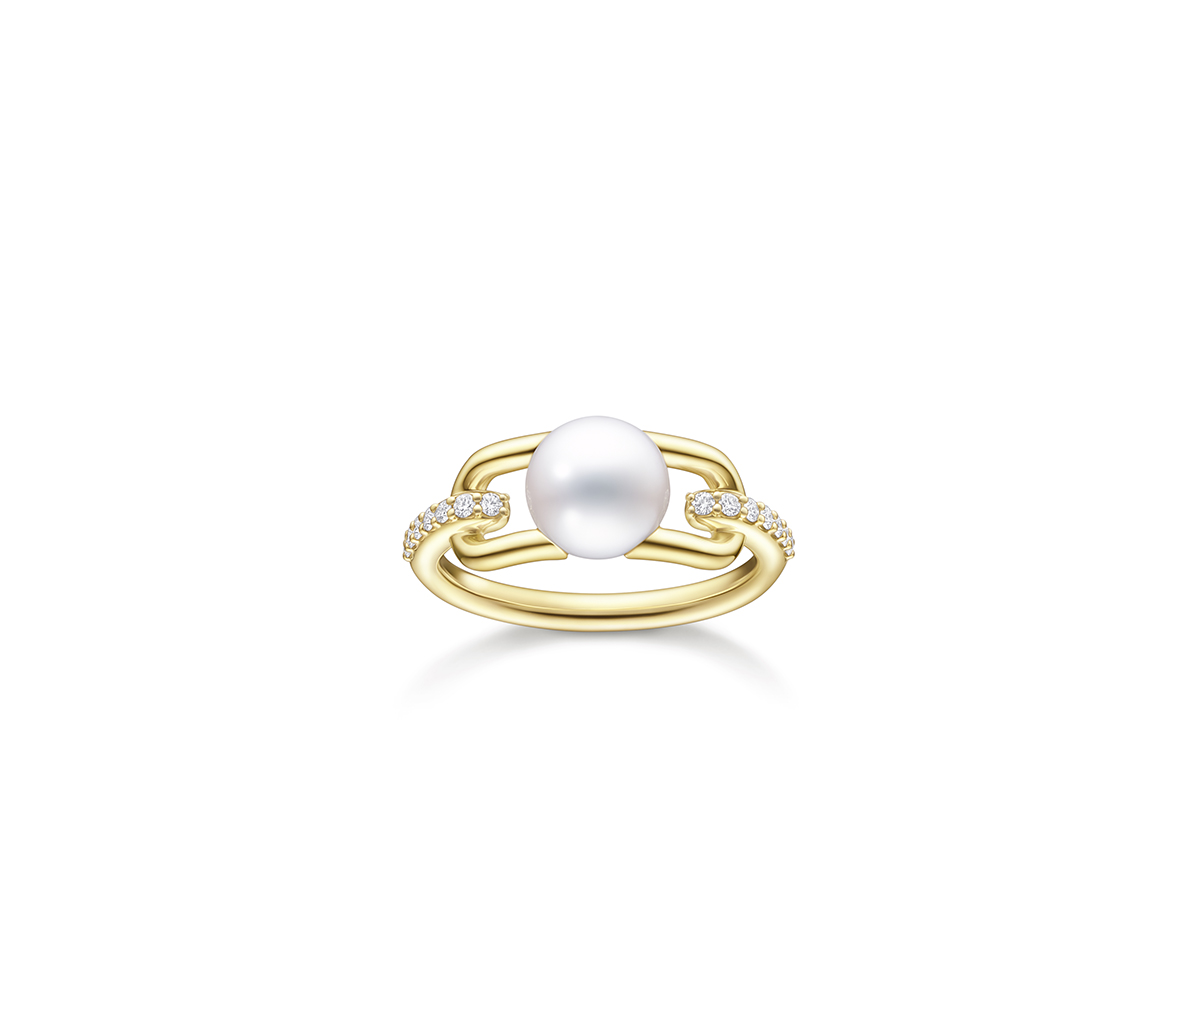 A gold ring with a pearl in the centre